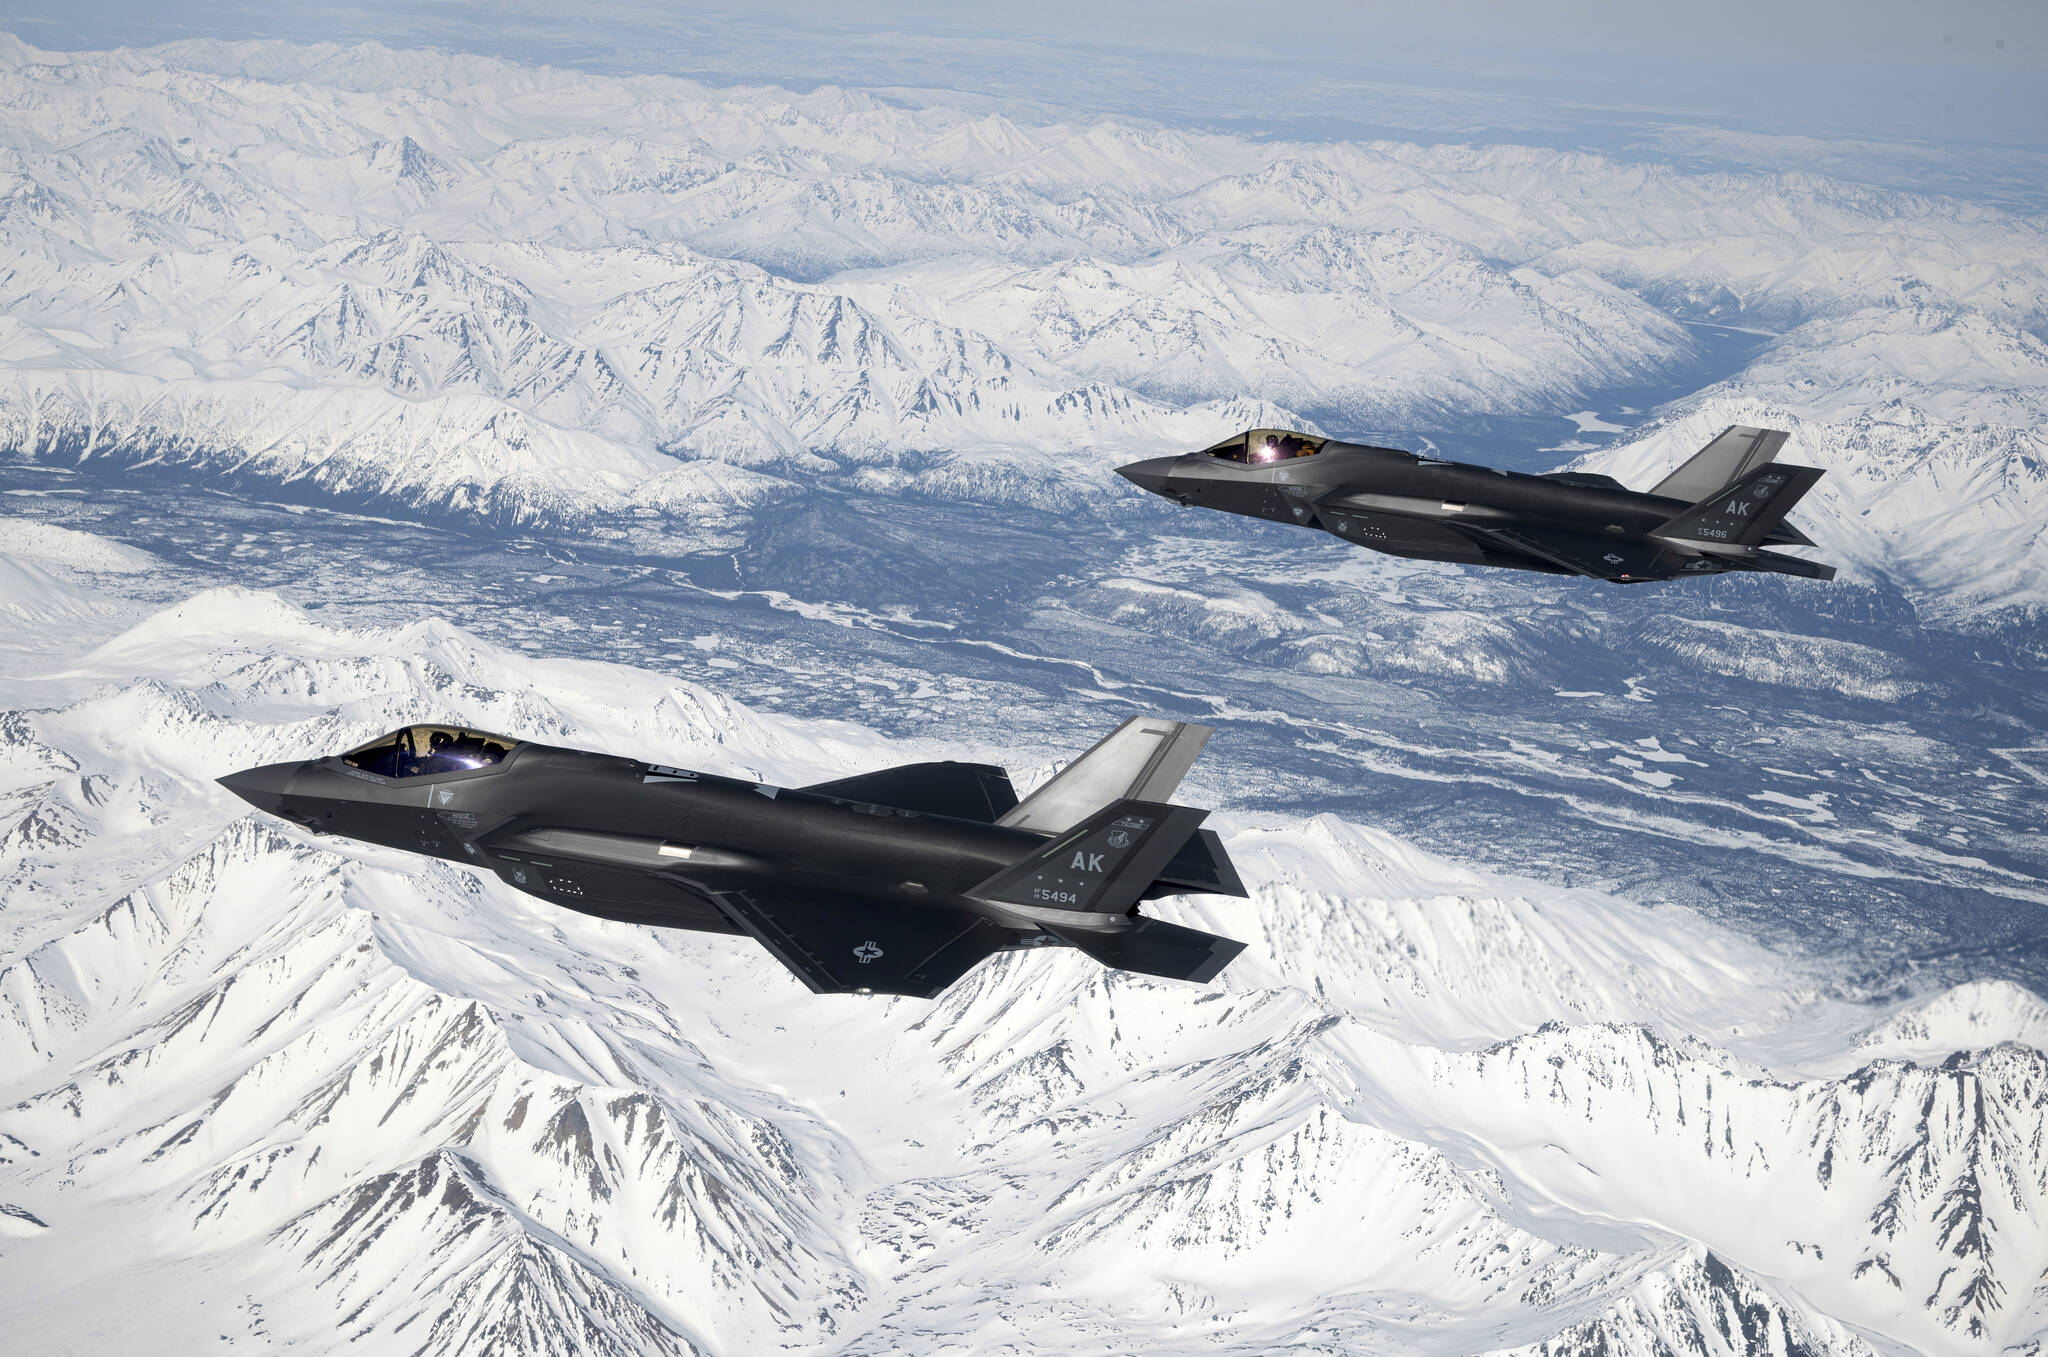 In this photo made available by the U.S. Air Force, two Air Force F-35A Lighting IIs assigned to the 354th Fighter Wing fly over the Joint Pacific Alaska Range Complex, April 14, 2022. The final two F-35A Joint Strike Fighter jets have arrived at Eielson Air Force Base near Fairbanks, Alaska, completing the full complement of 54 aircraft. Col. David “Ajax” Berkland of the 354 Fighter Wing at Eielson called it “a really significant day for us in terms of the buildup of Eielson Air Force Base.” (Senior Airman Jose Miguel Tamondong / U.S. Air Force via AP)